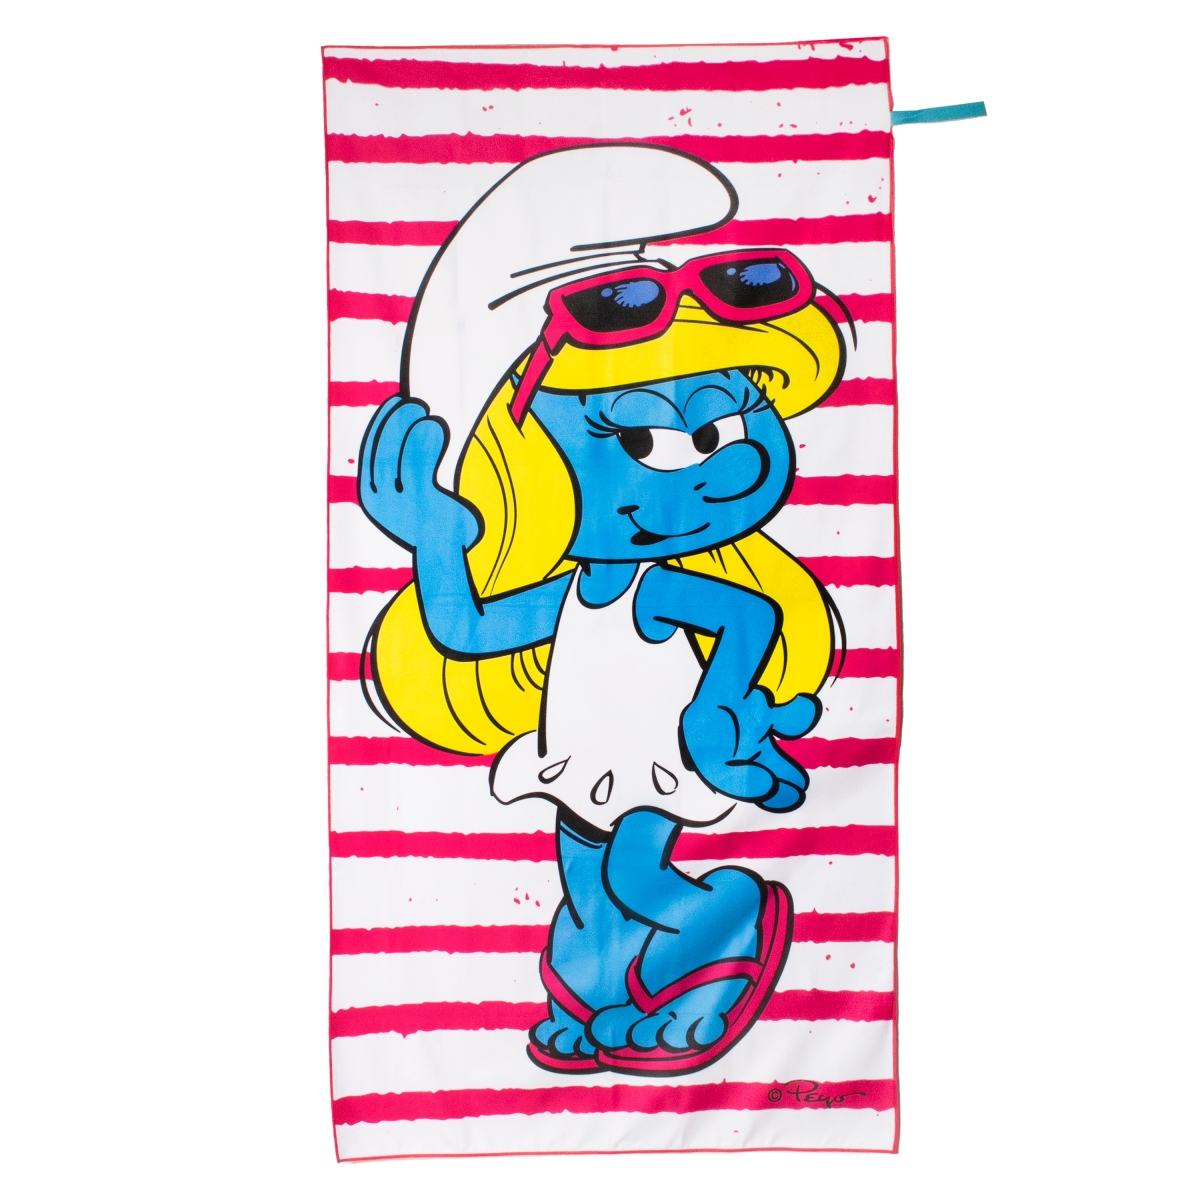 Picture of BeachTech VHBLV10047 30 x 60 in. The Smurfs Smurfette Sustainable Beach Towel